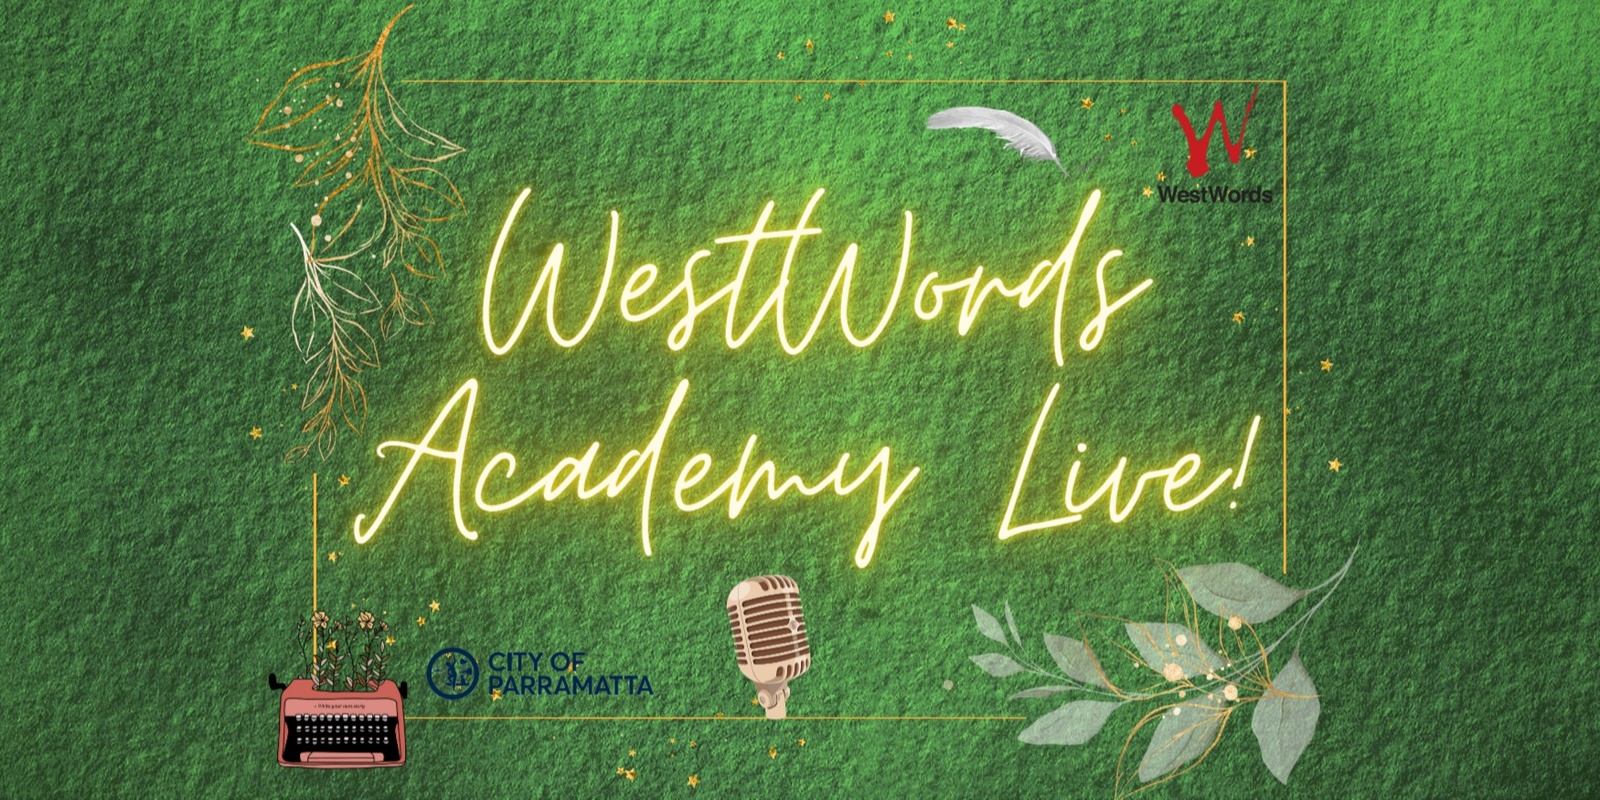 Banner image for Academy Live in June!